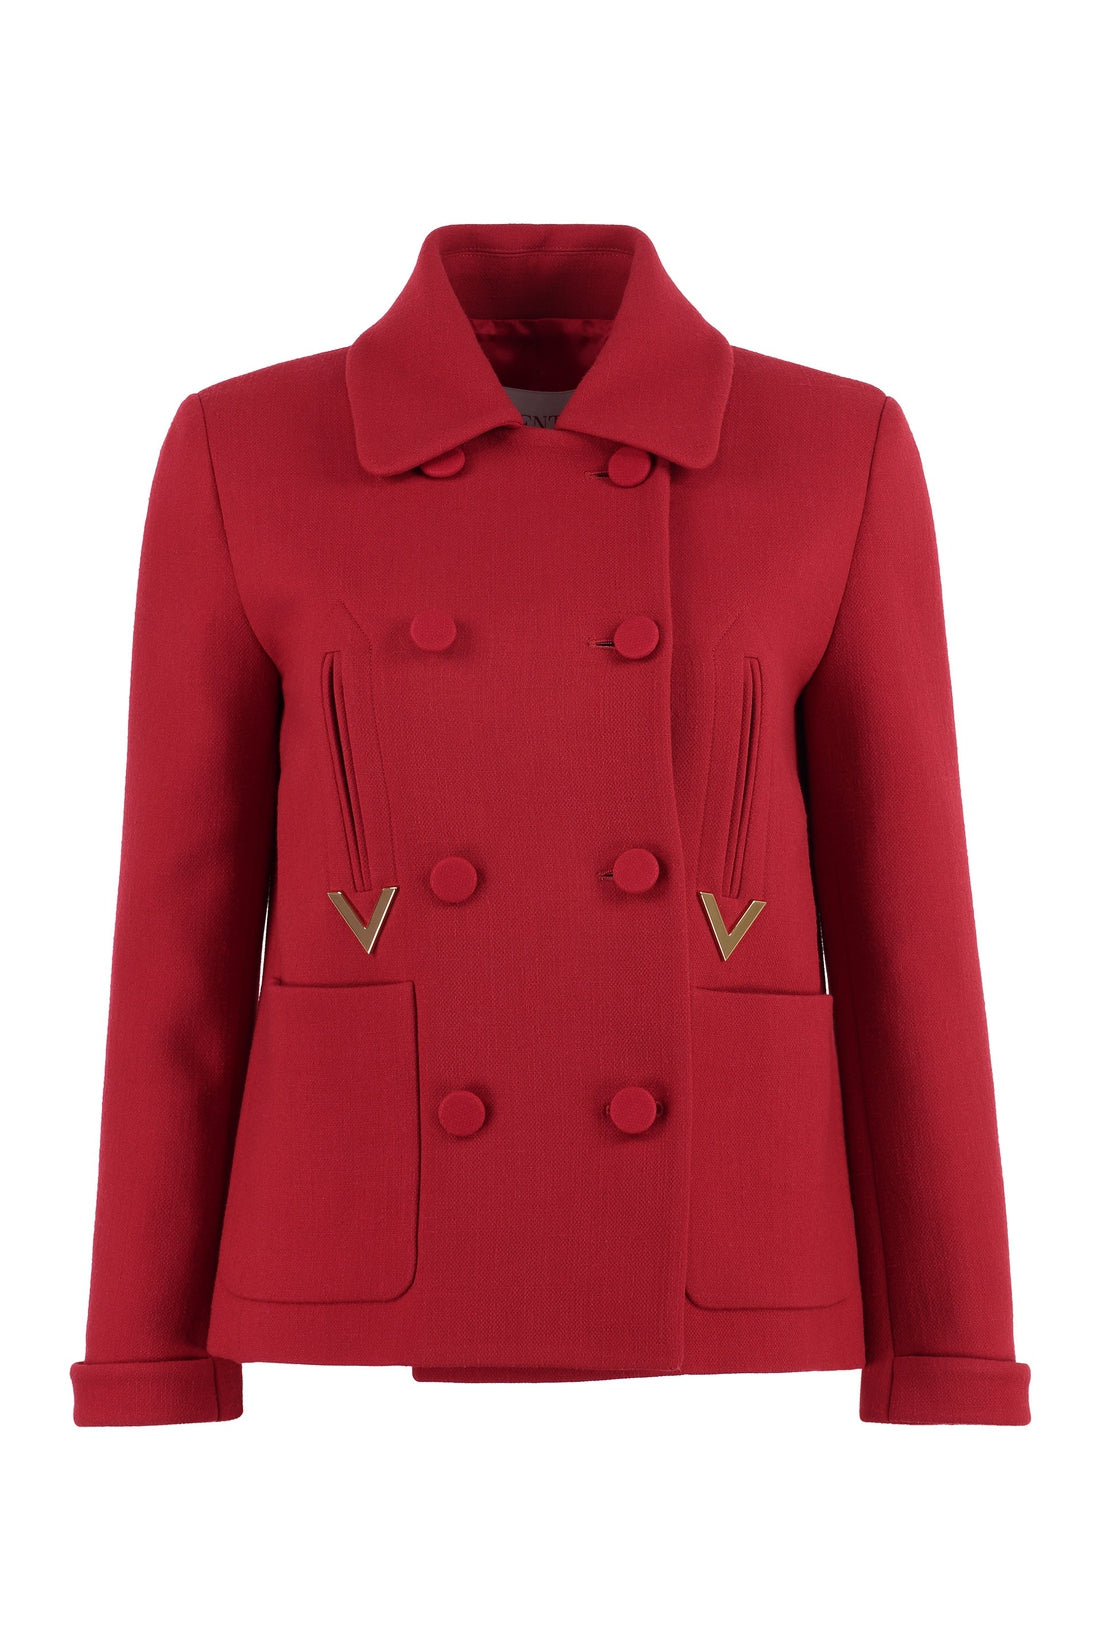 Valentino-OUTLET-SALE-Double-breasted wool jacket-ARCHIVIST